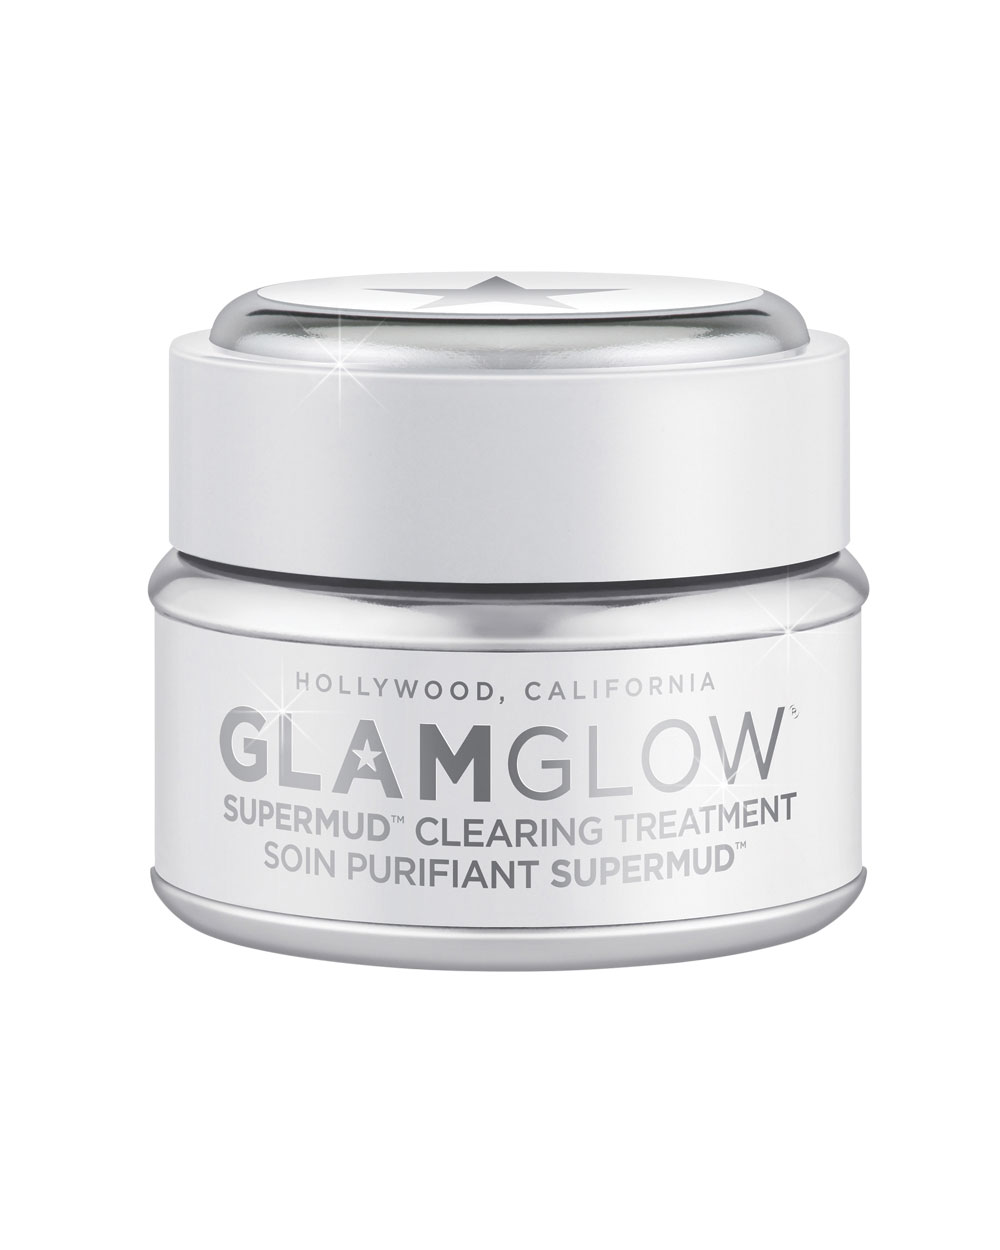 Pore saviour GlamGlow Supermud Clearing Treatment, $109, from Mecca Cosmetica